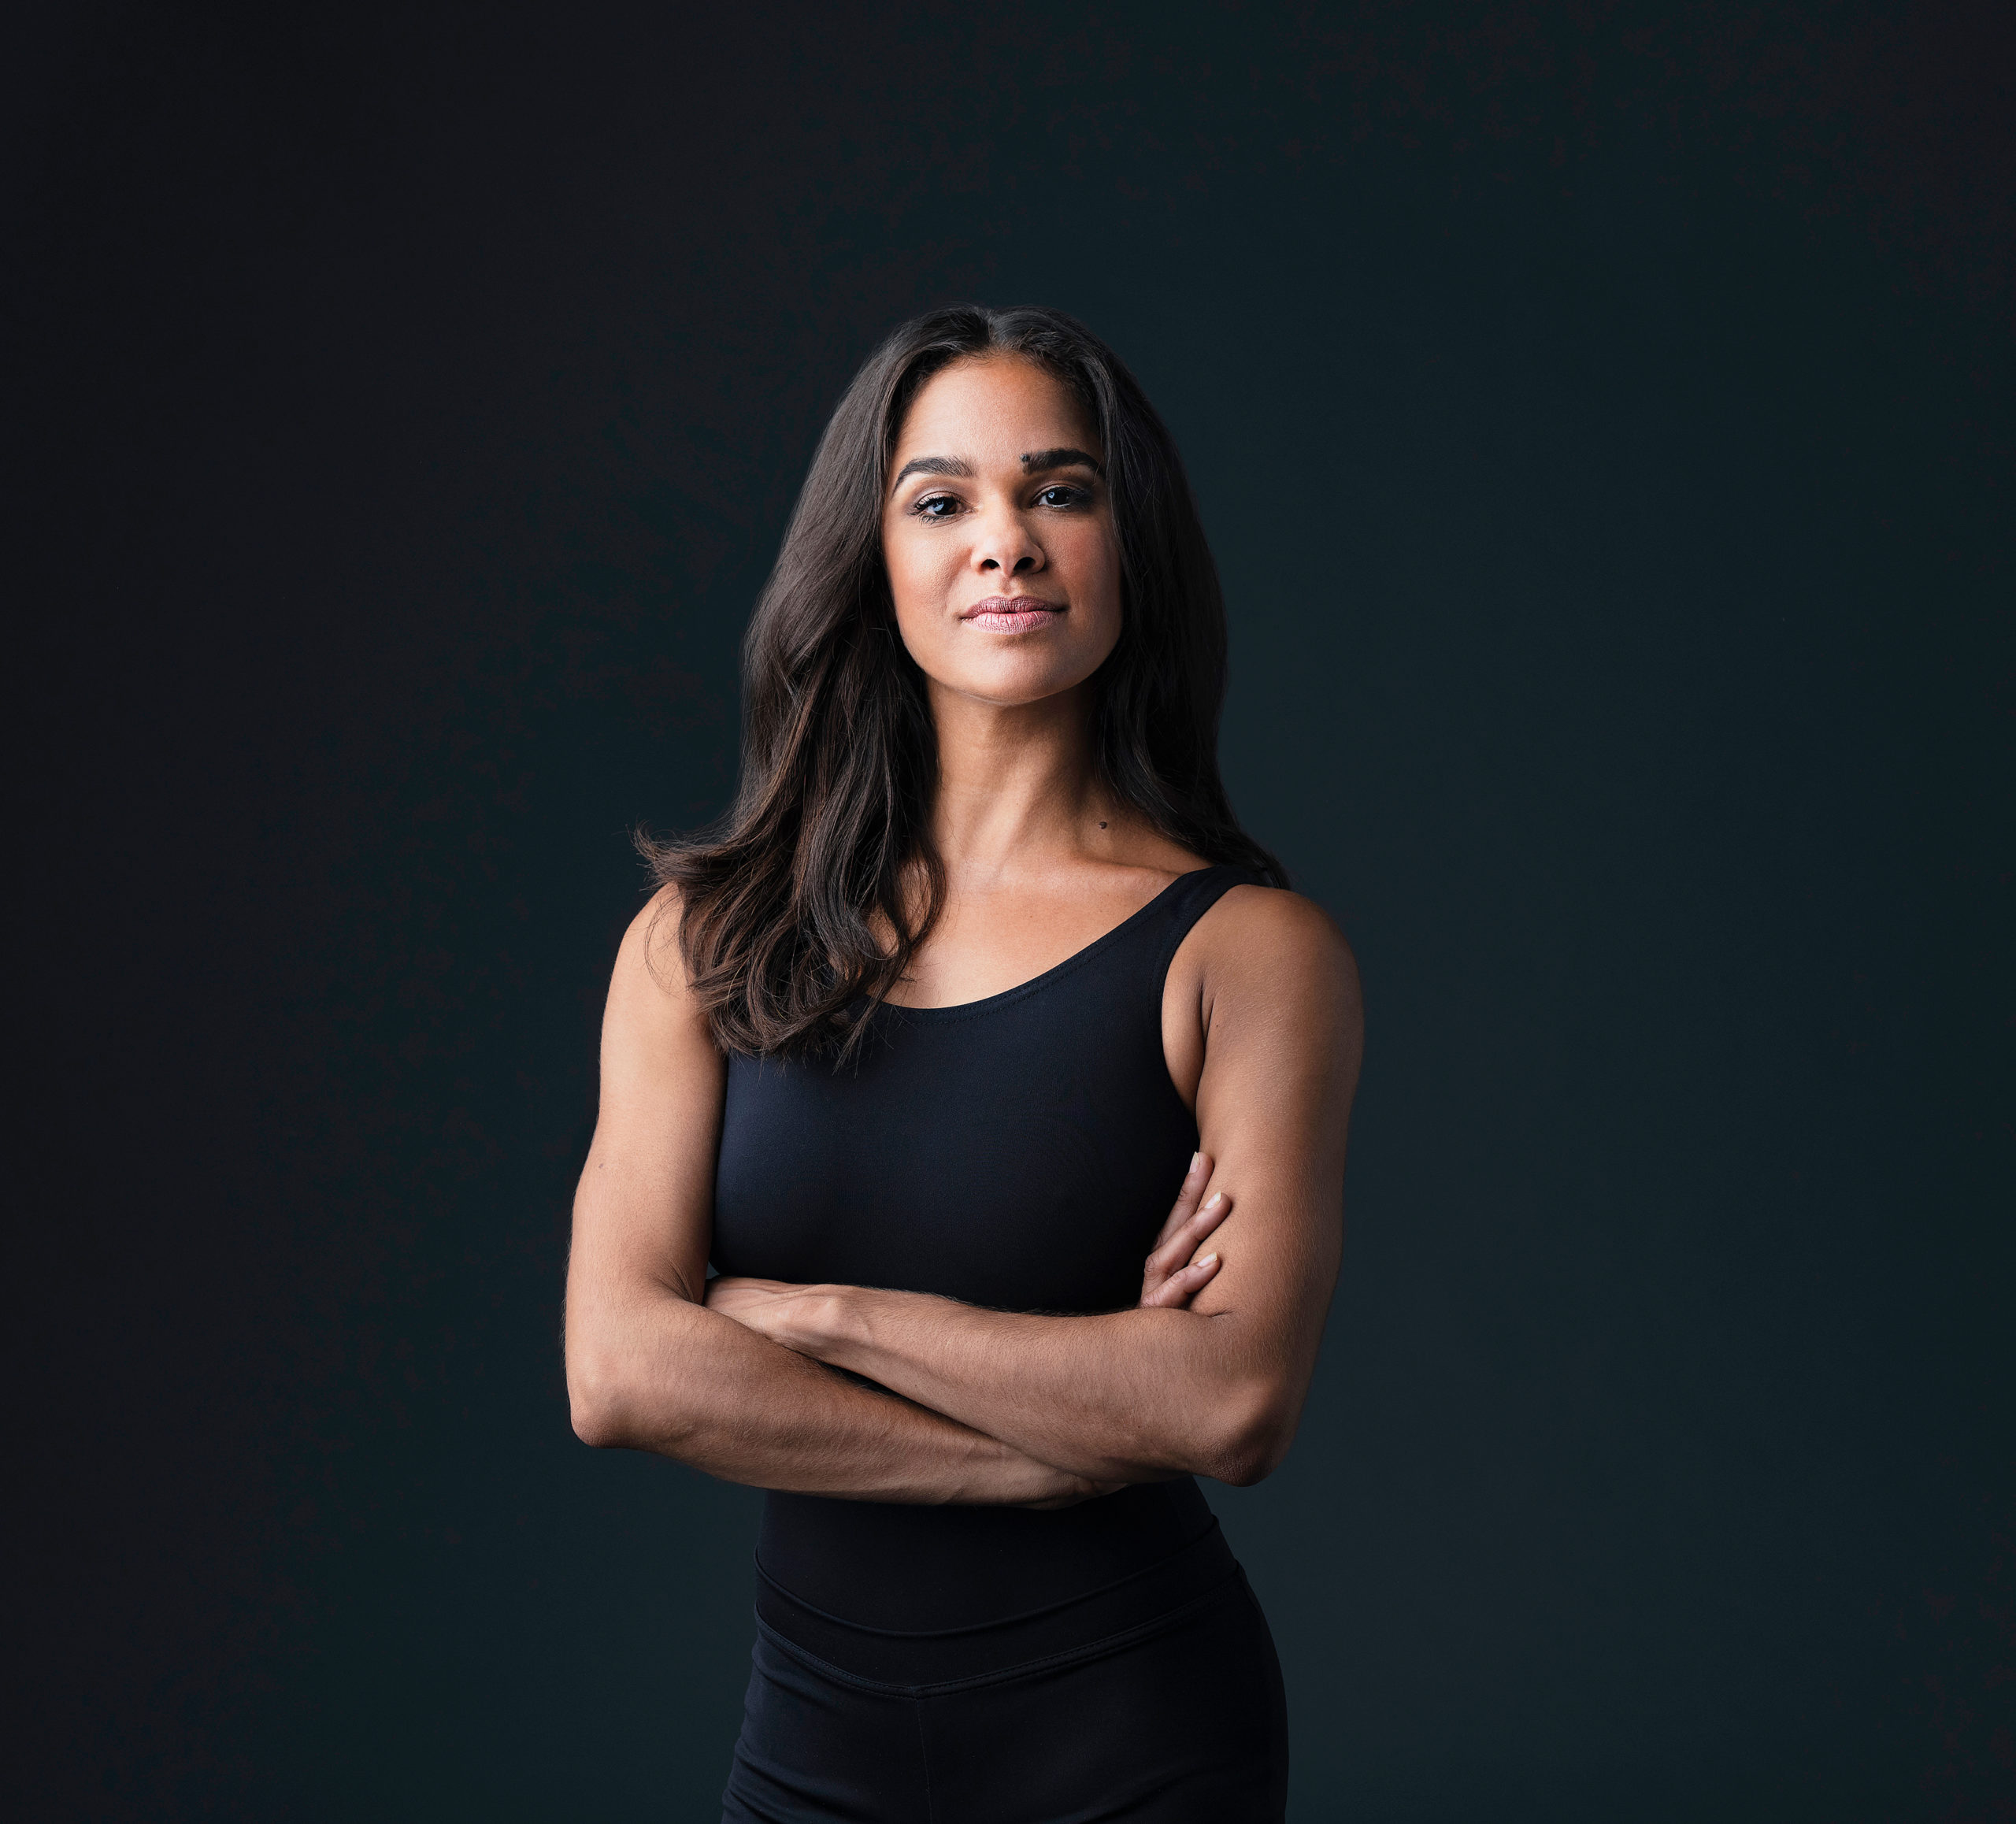 Misty Copeland poses against a black backdrop. Her arms are crossed as she looks straight at the camera with a small close-lipped smile.